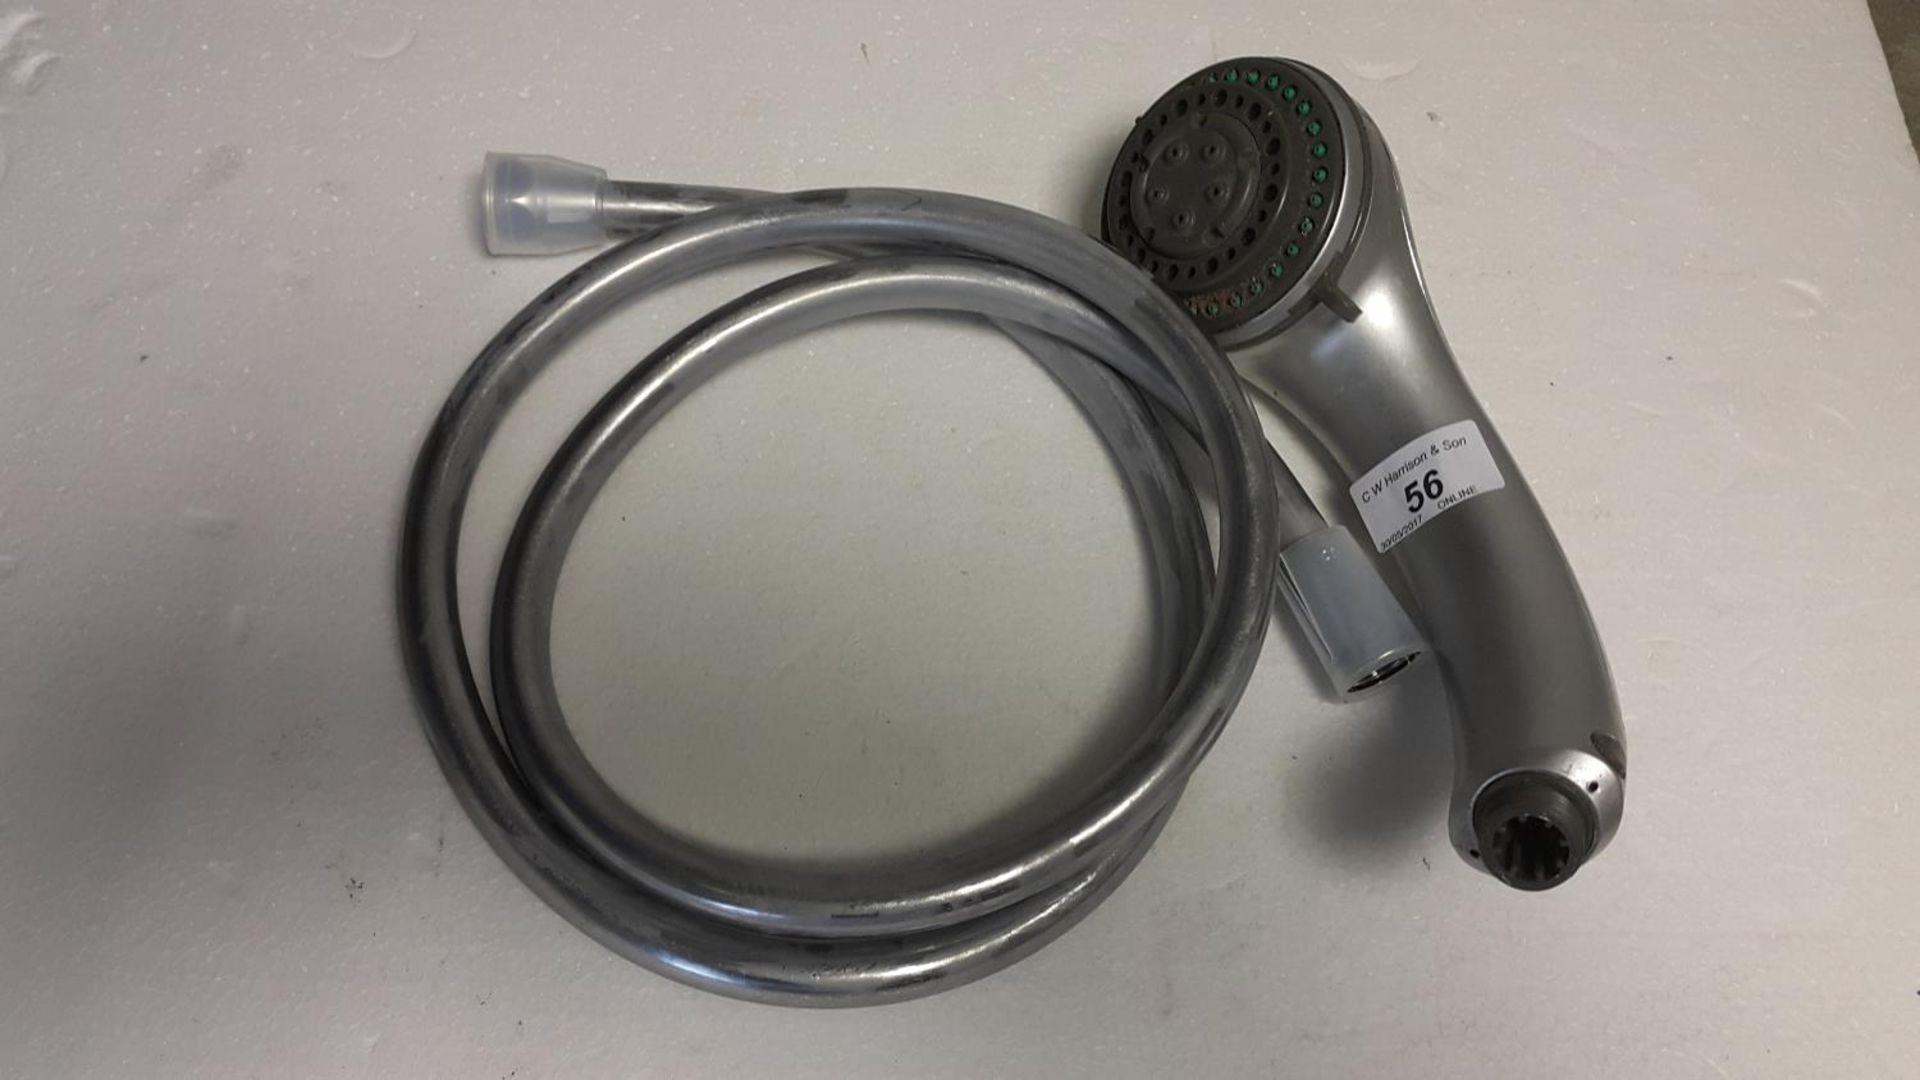 Replacement shower handset and hose - Image 2 of 2